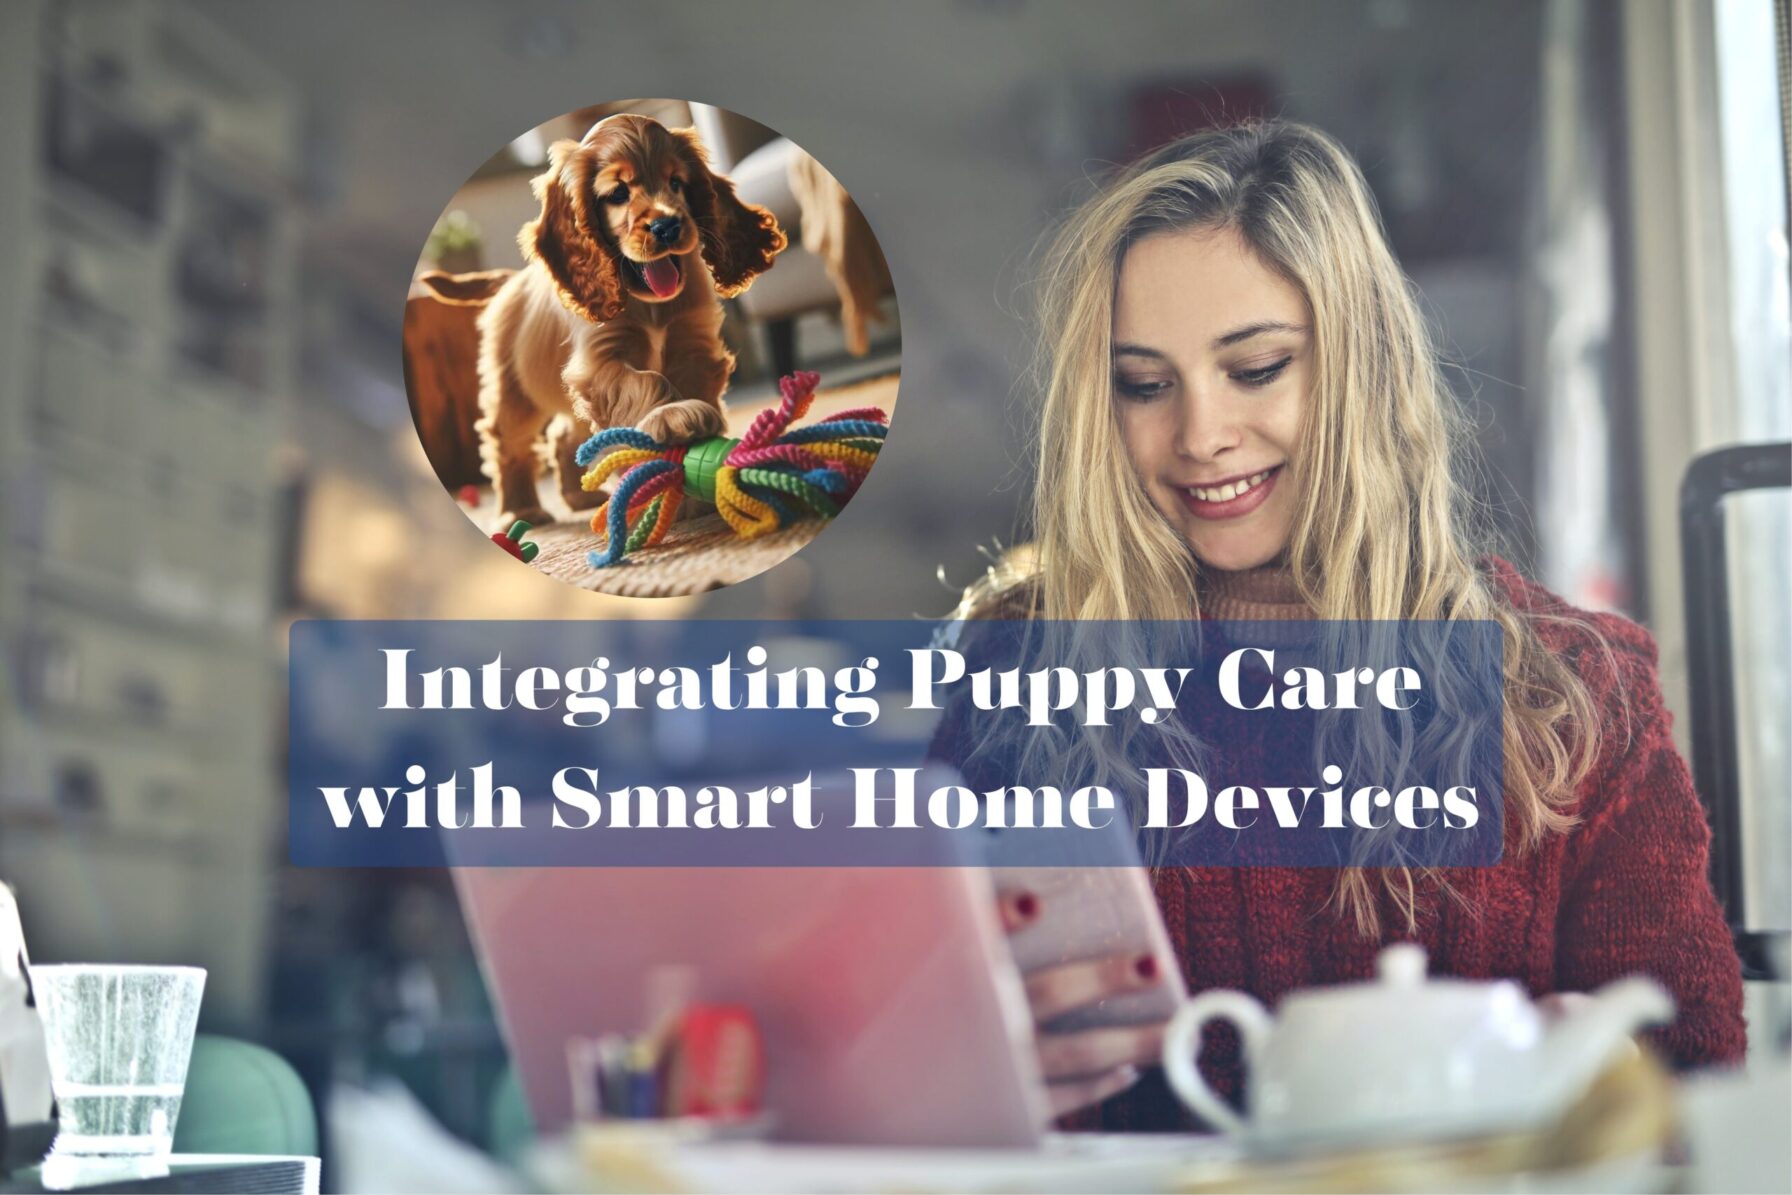 Woman using technology for puppy care.